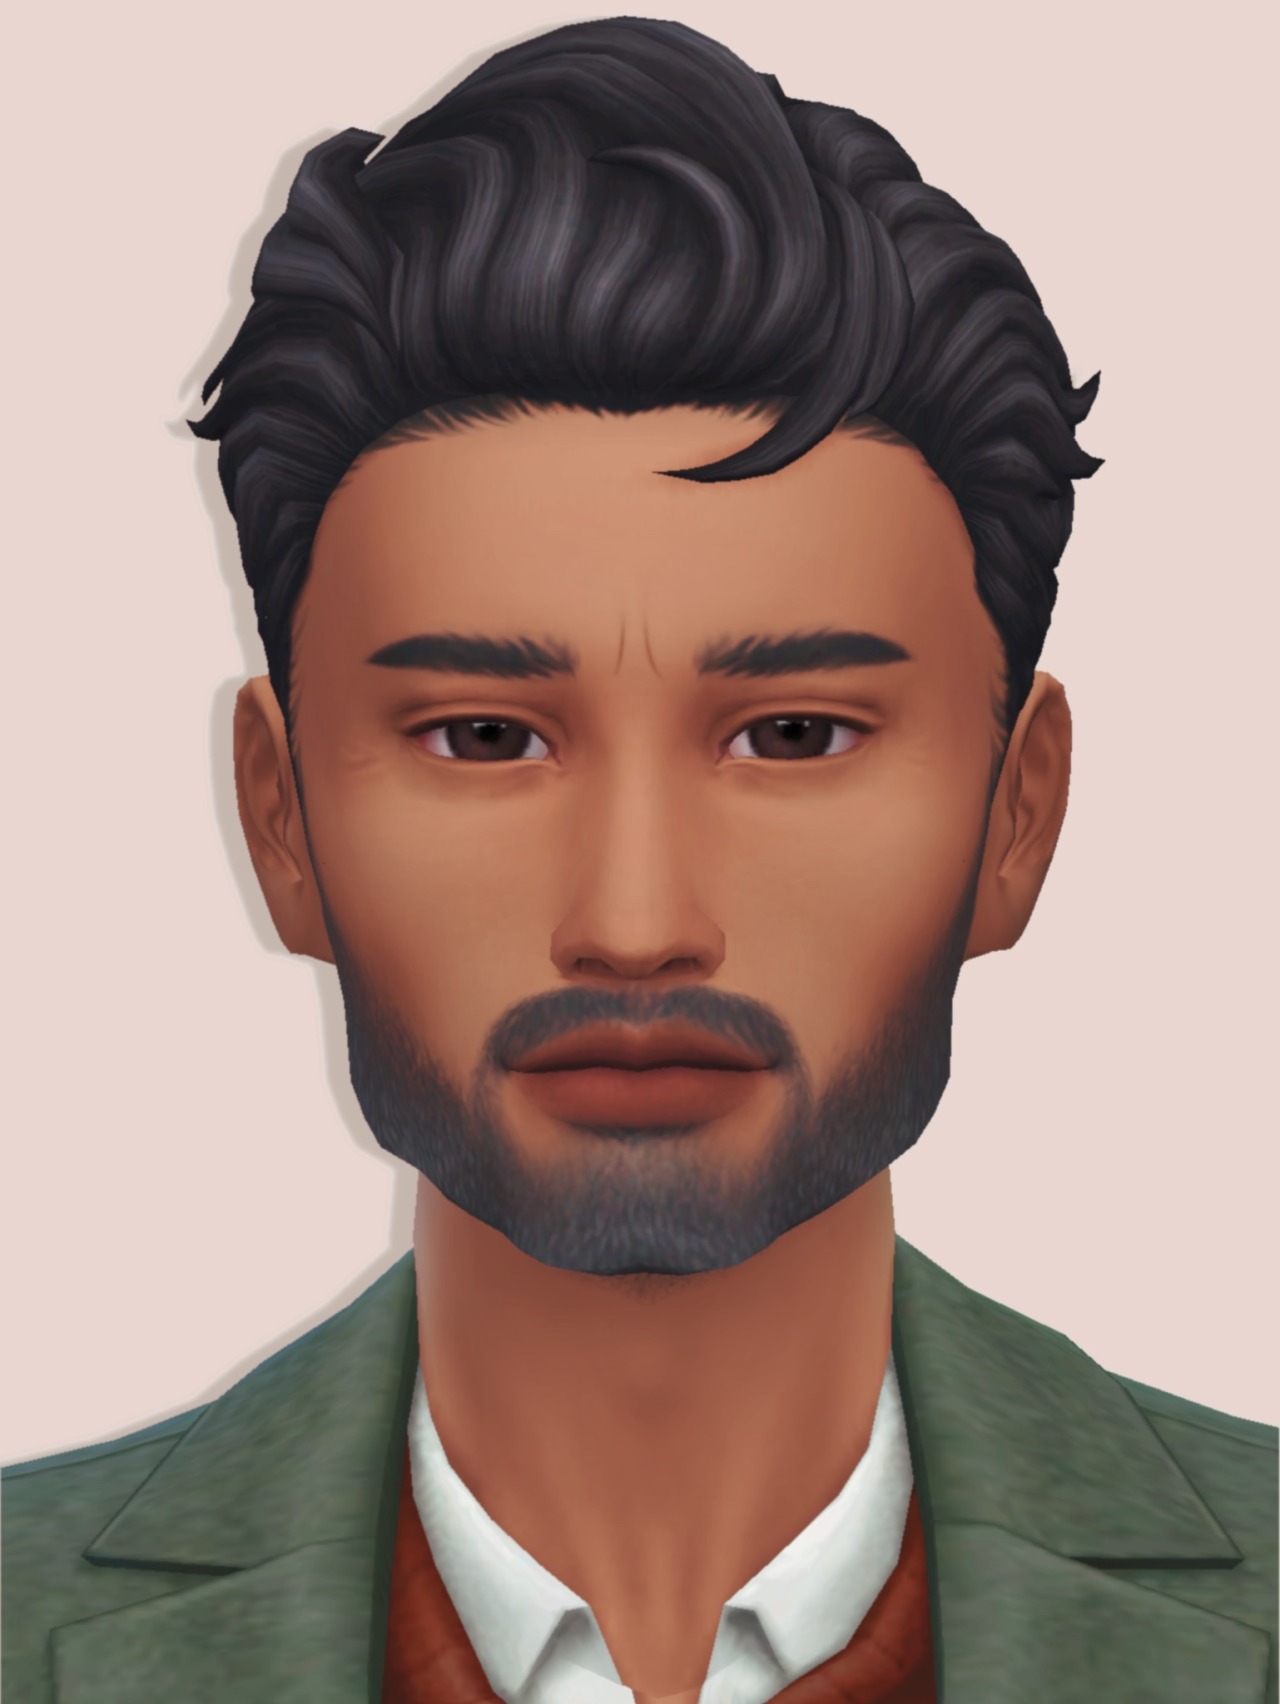 Sims 4 Decided I Needed Another Male Sim The Game Misty Meadows Dump